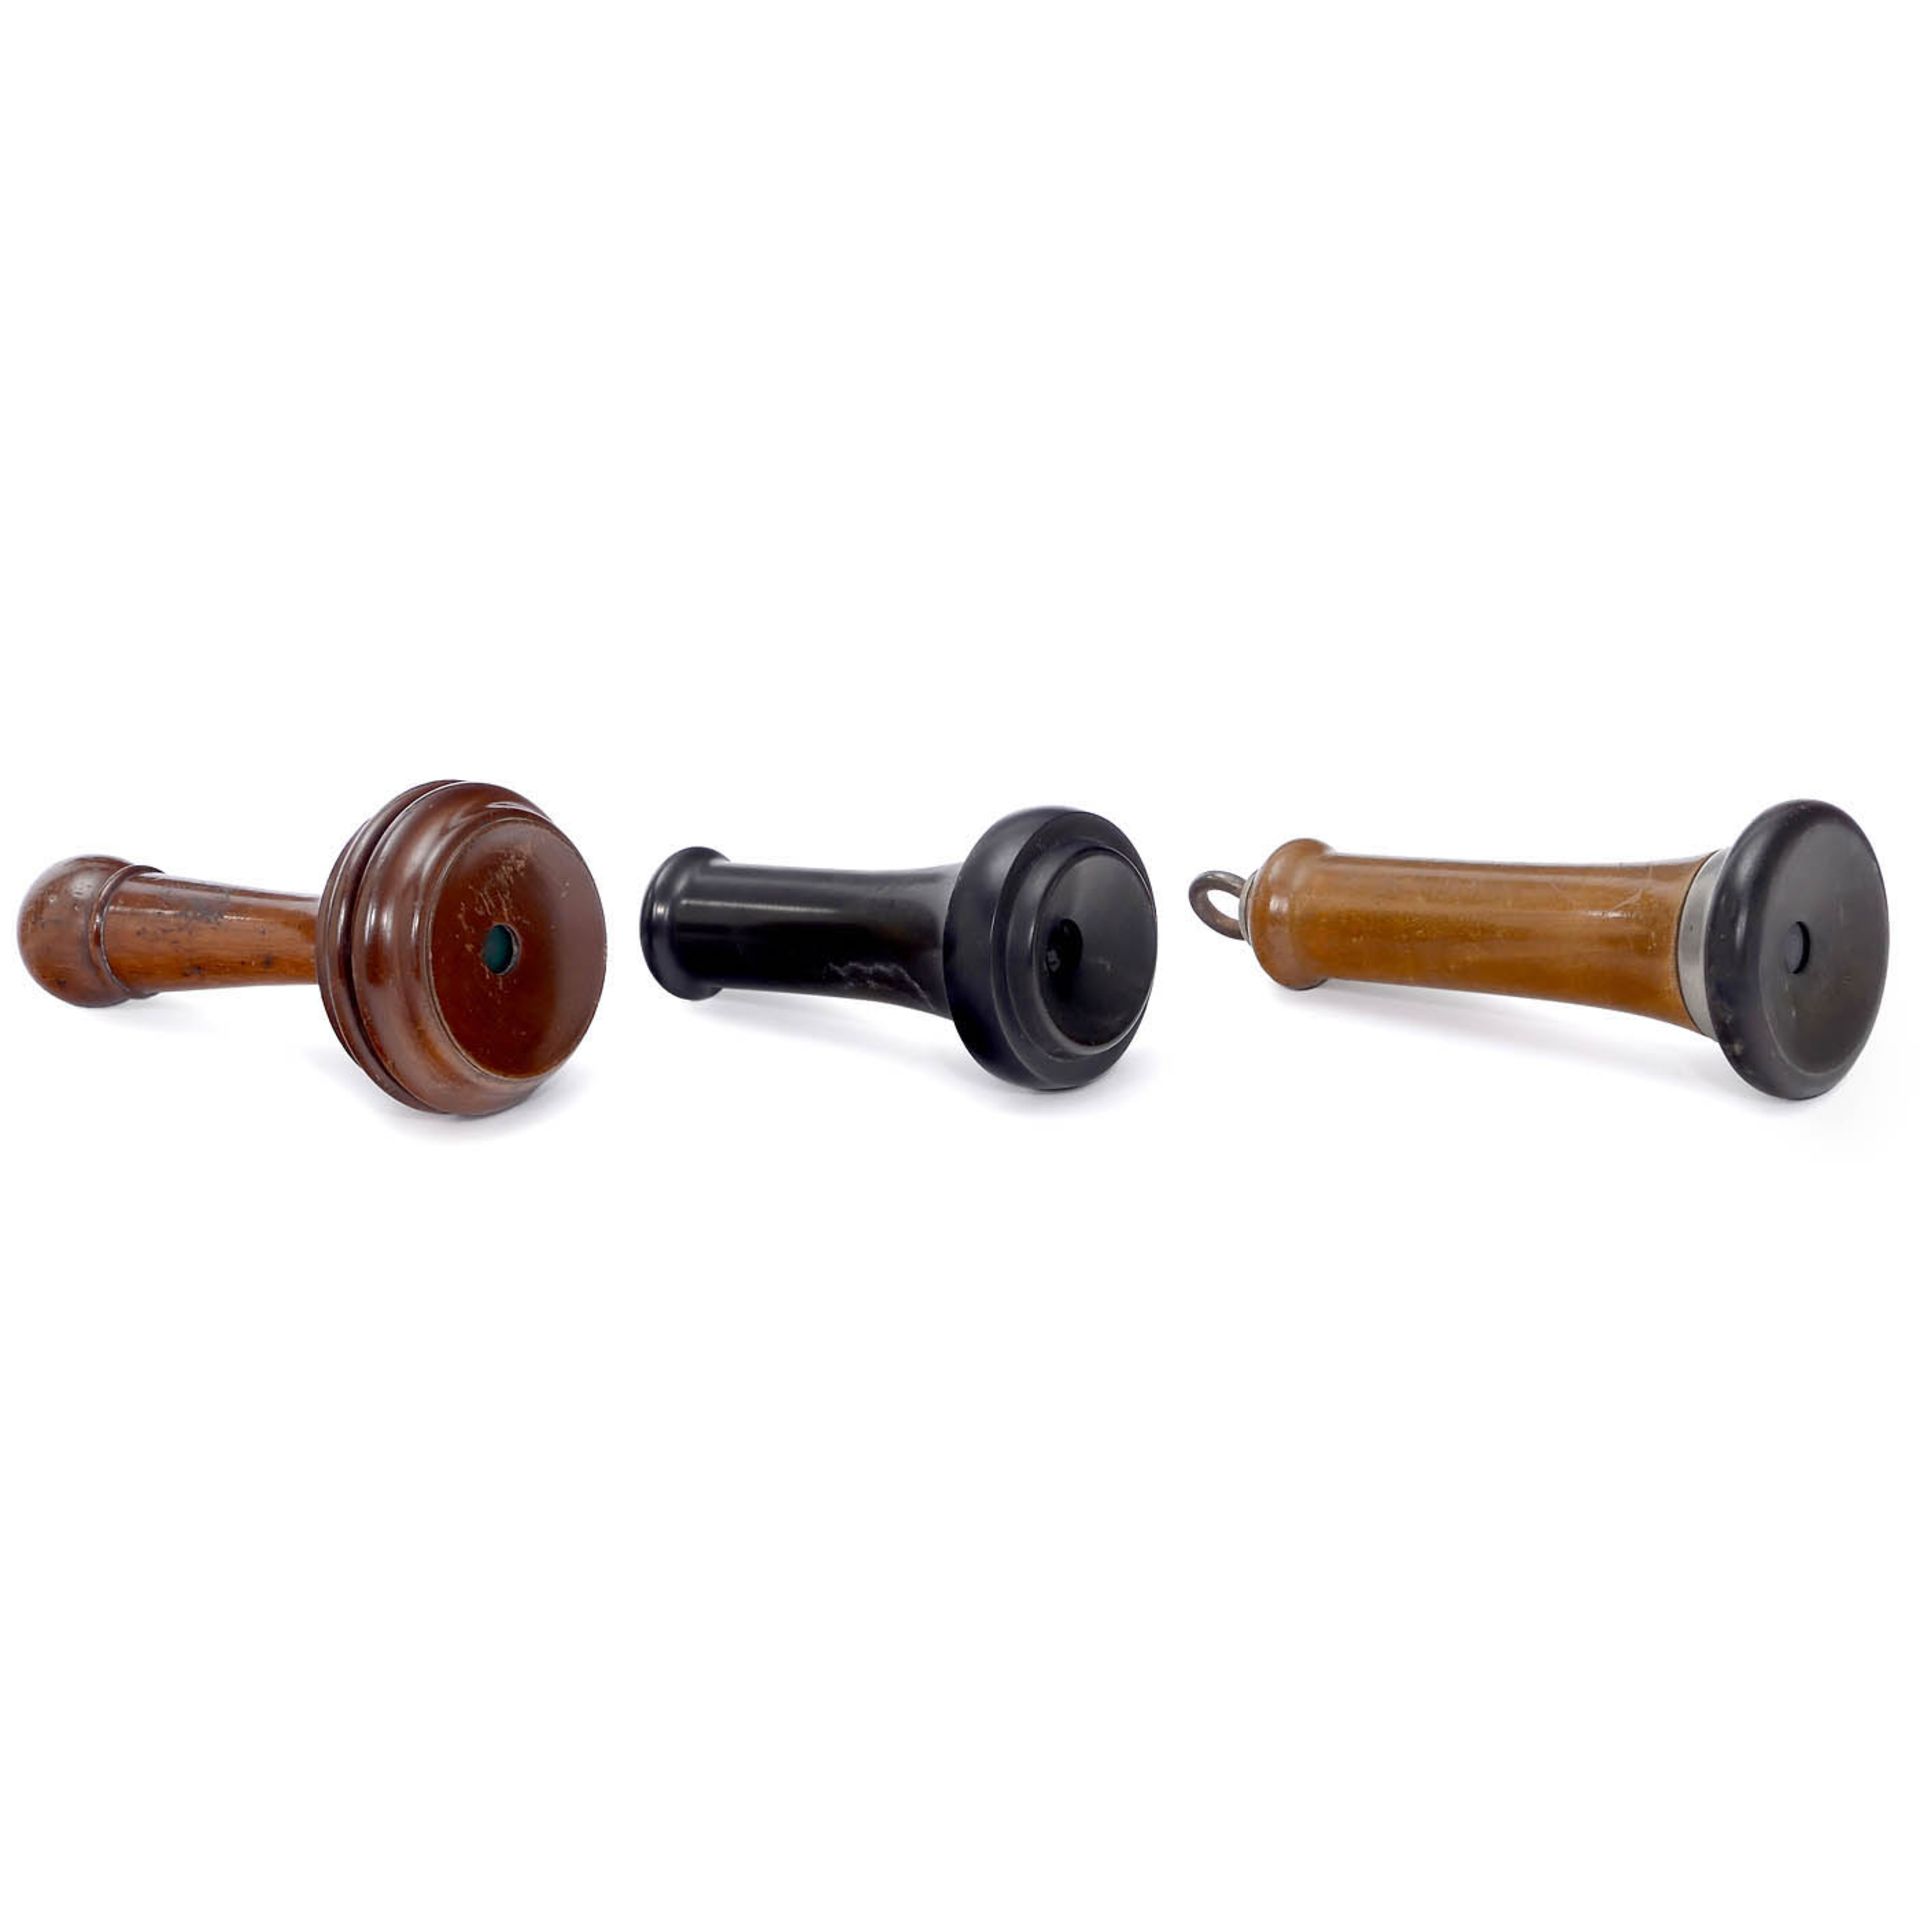 3 Bell-Type Telephone Handsets, 1877 onwards - Image 2 of 2